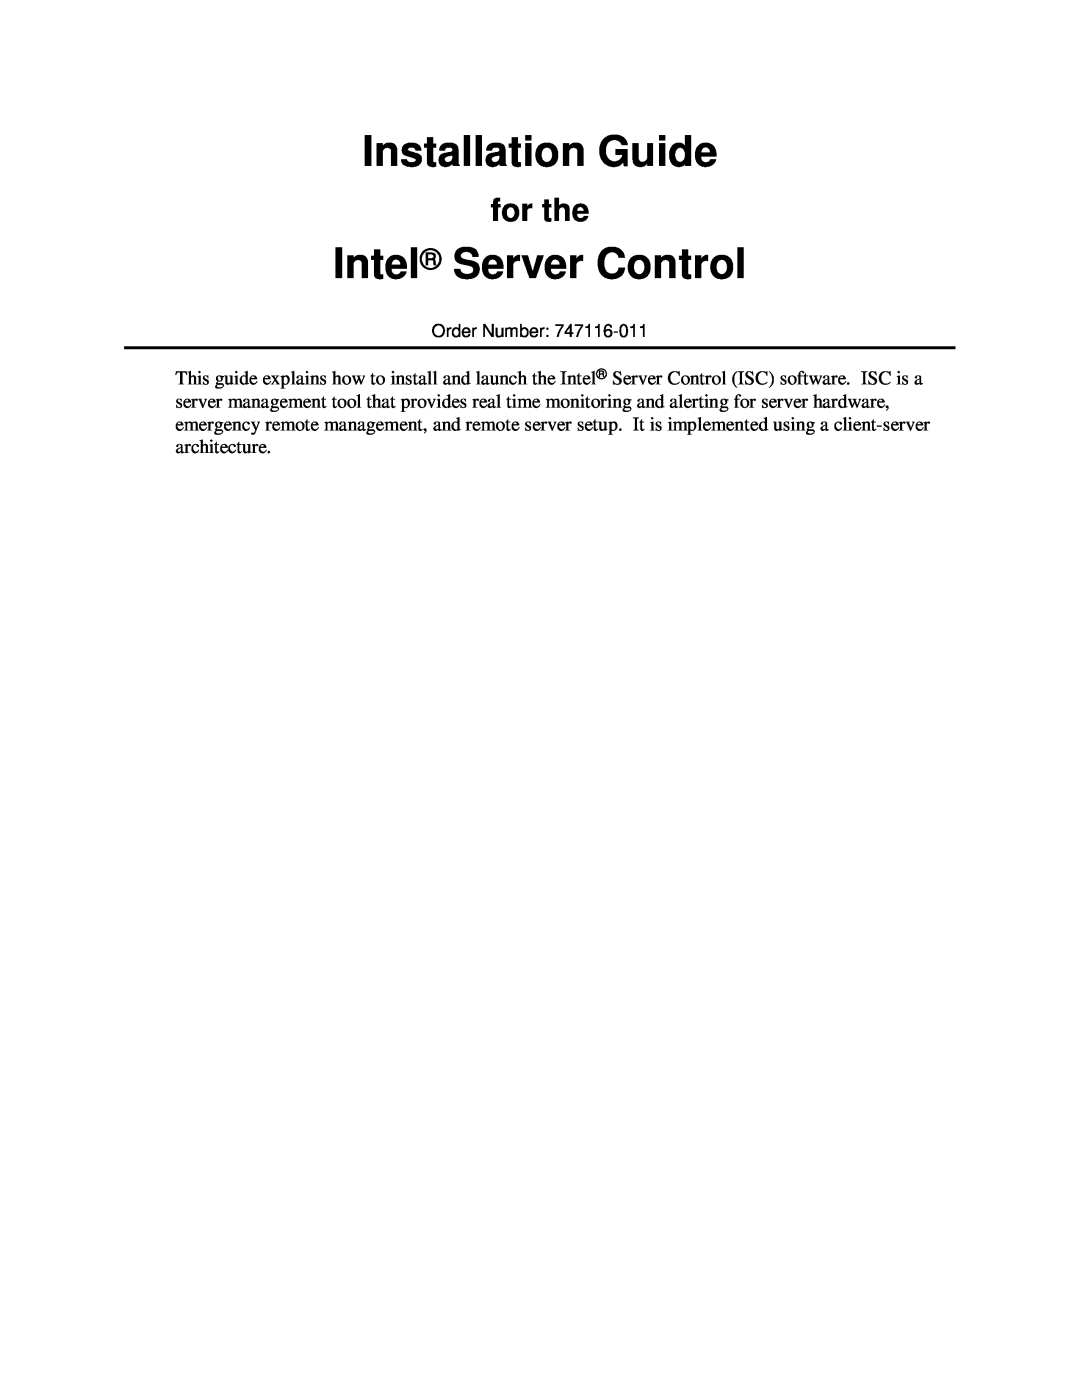 Intel 747116-011 manual for the, Installation Guide, Intel Server Control, Order Number 